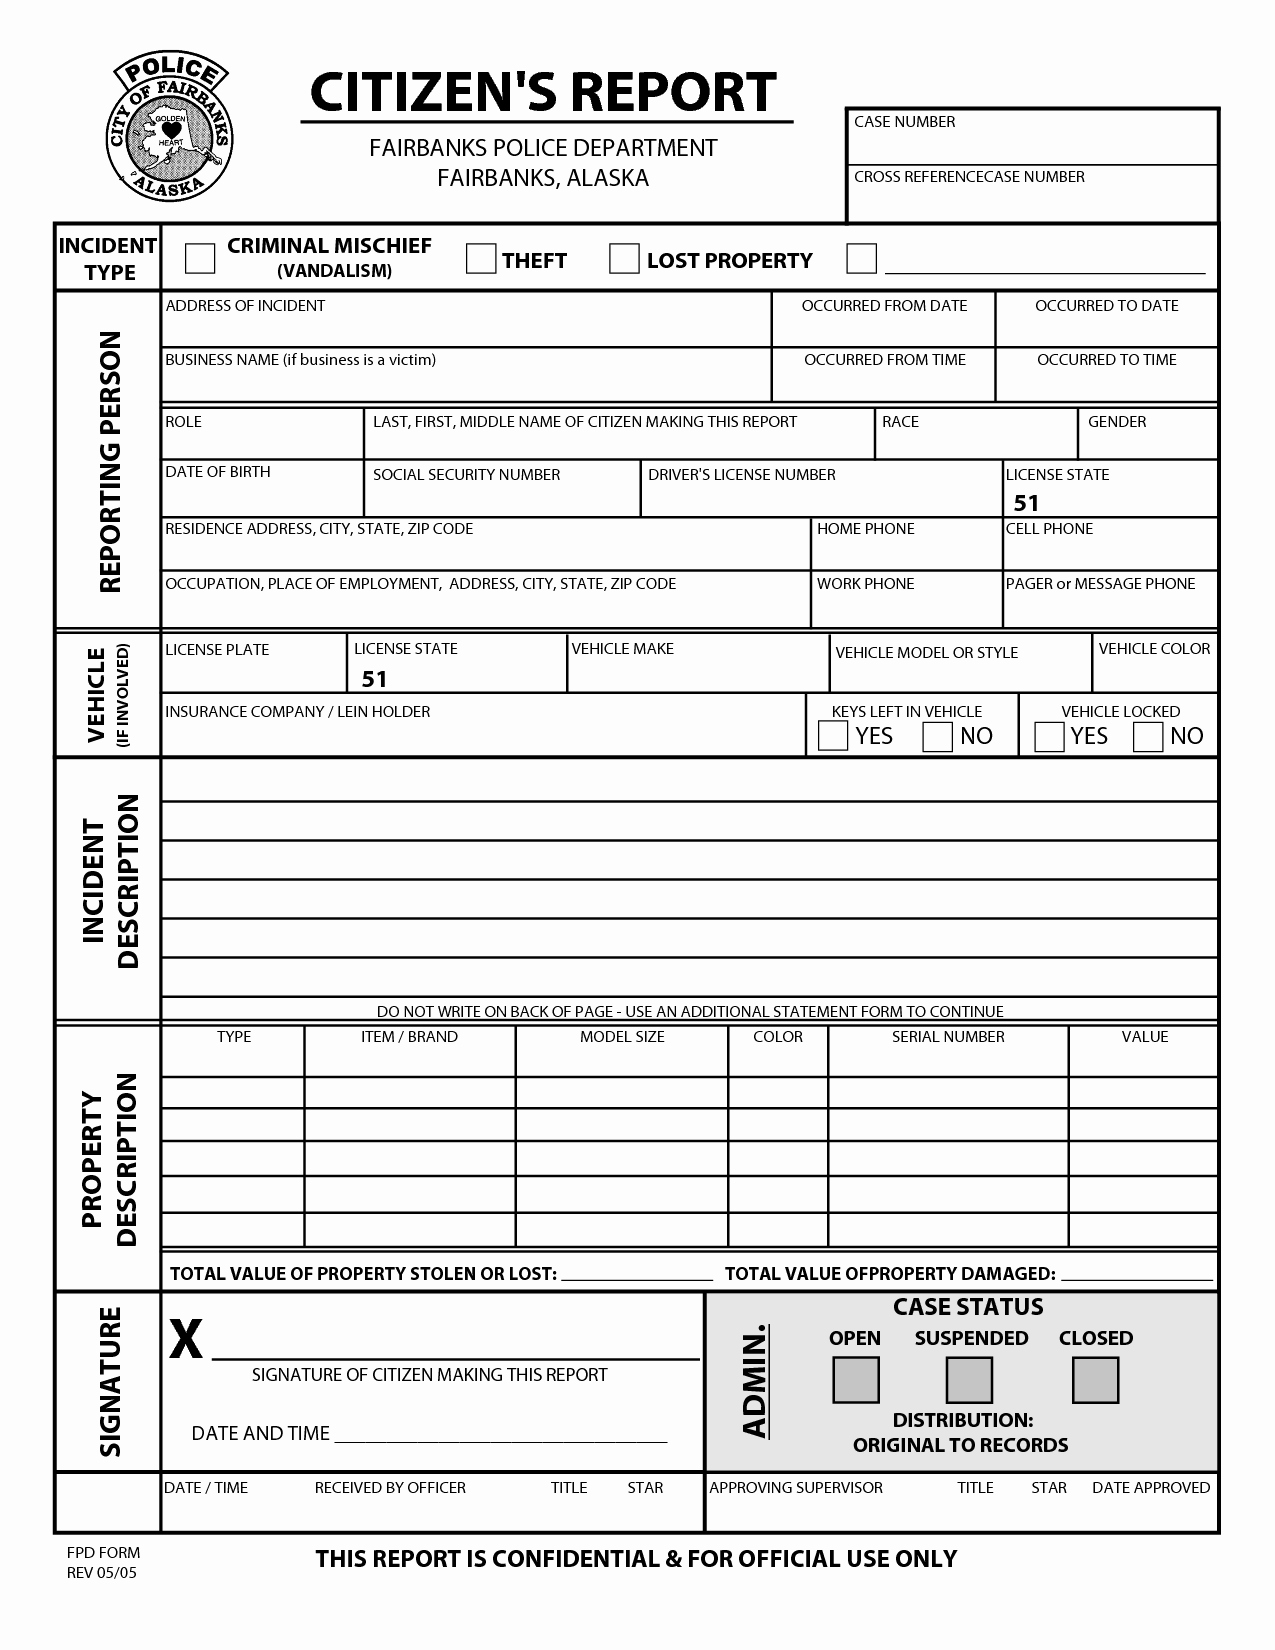 Police Report Template Pdf Lovely Best S Of Police Report Pdf Sample Police Report